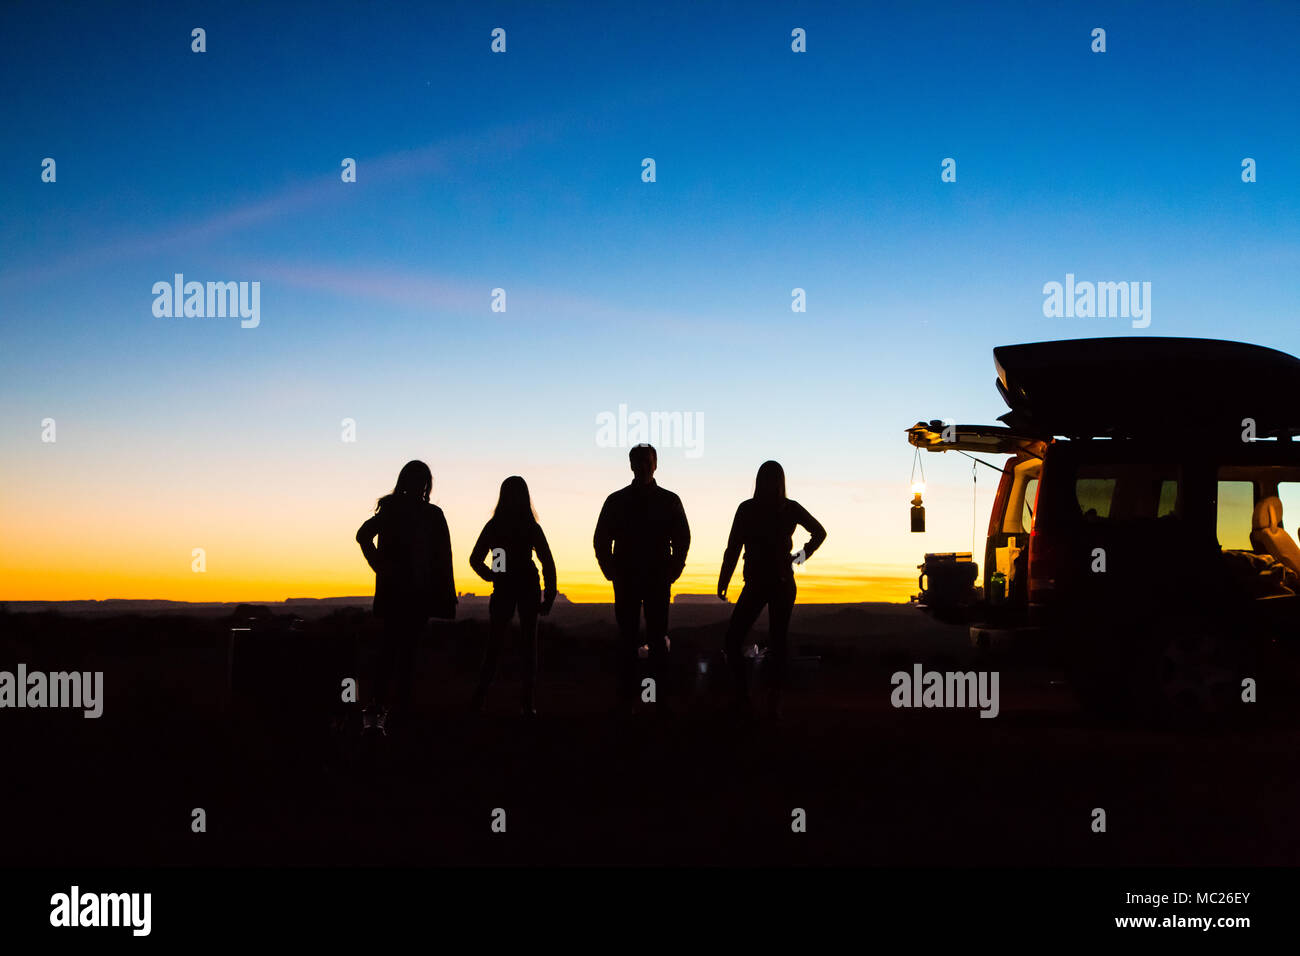 The silhouettes of a family of four stand behind an open SUV with a lantern hanging from it. They appear to be camping. Stock Photo